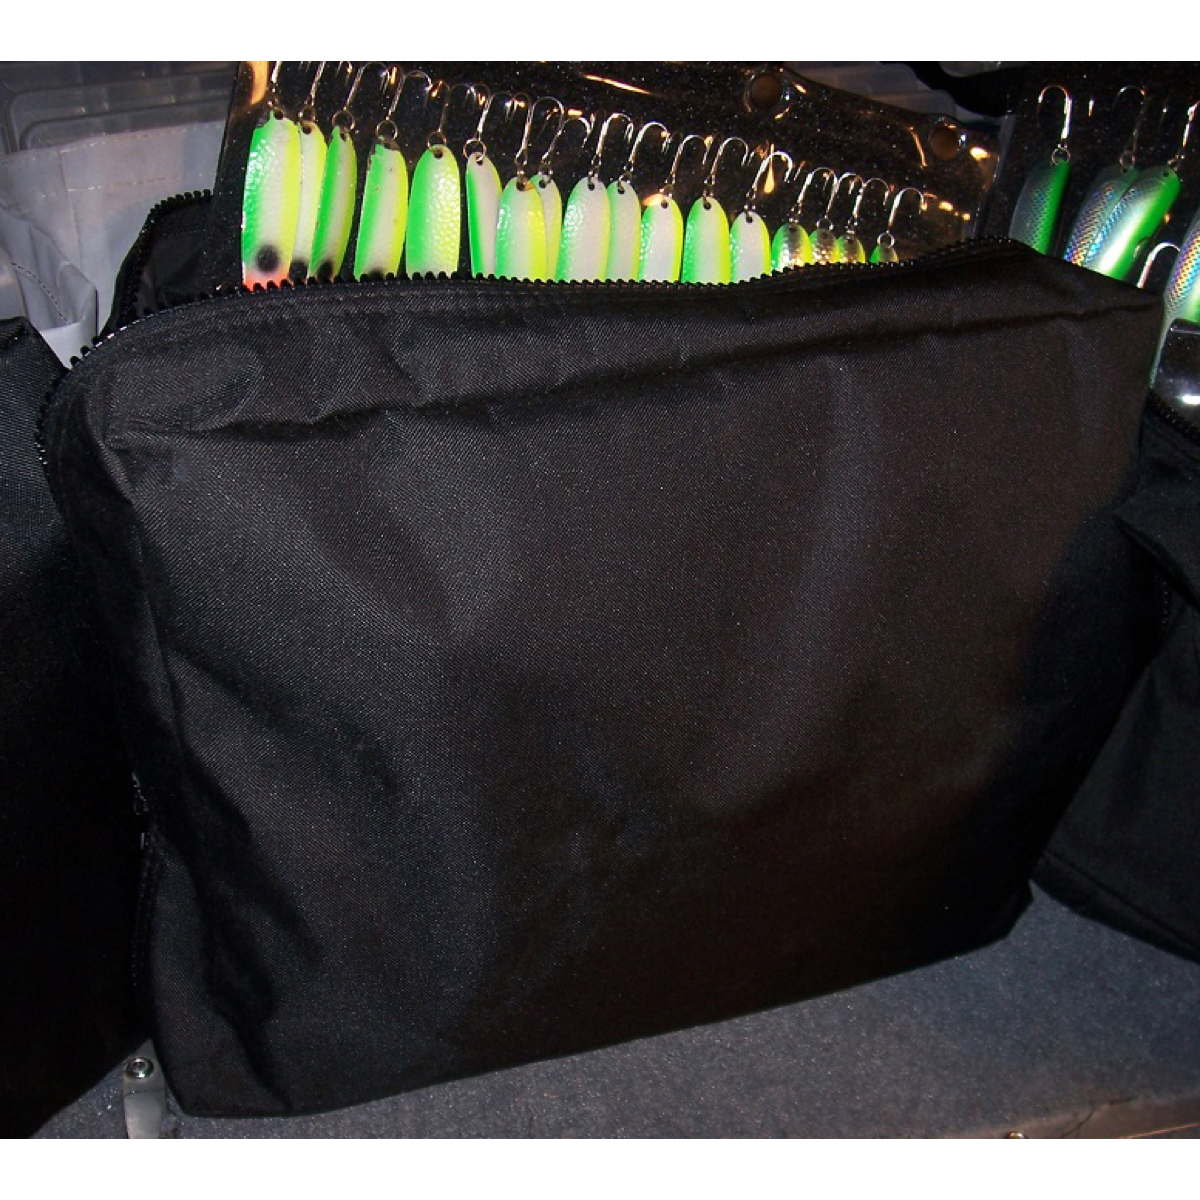 Photo of Amish Outfitters Spoon Pad Bag for sale at United Tackle Shops.